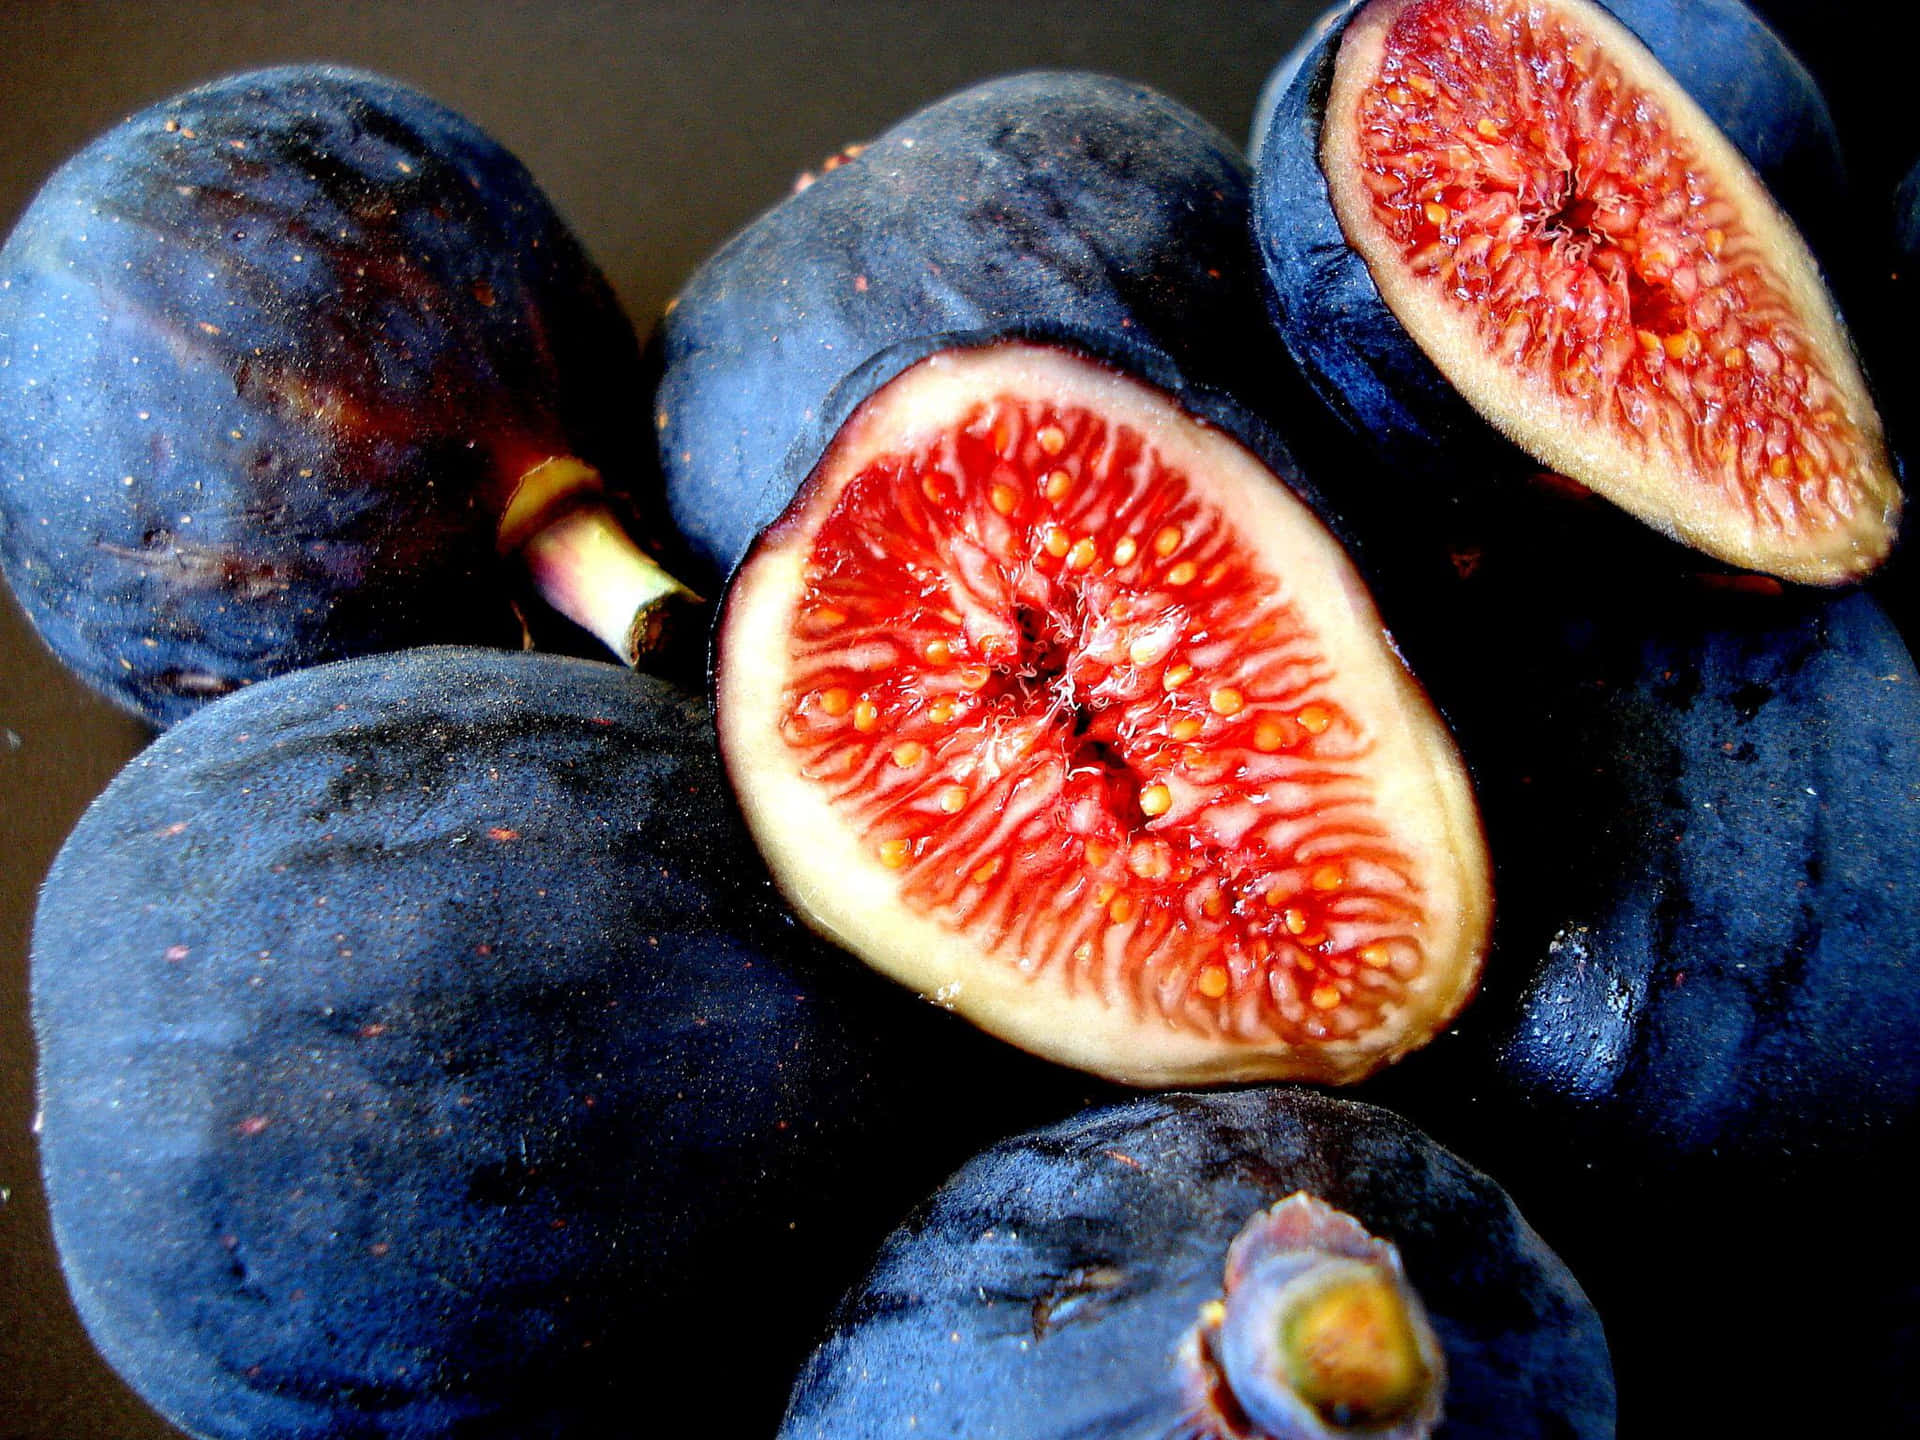 "Luscious purple figs ready for harvest" Wallpaper